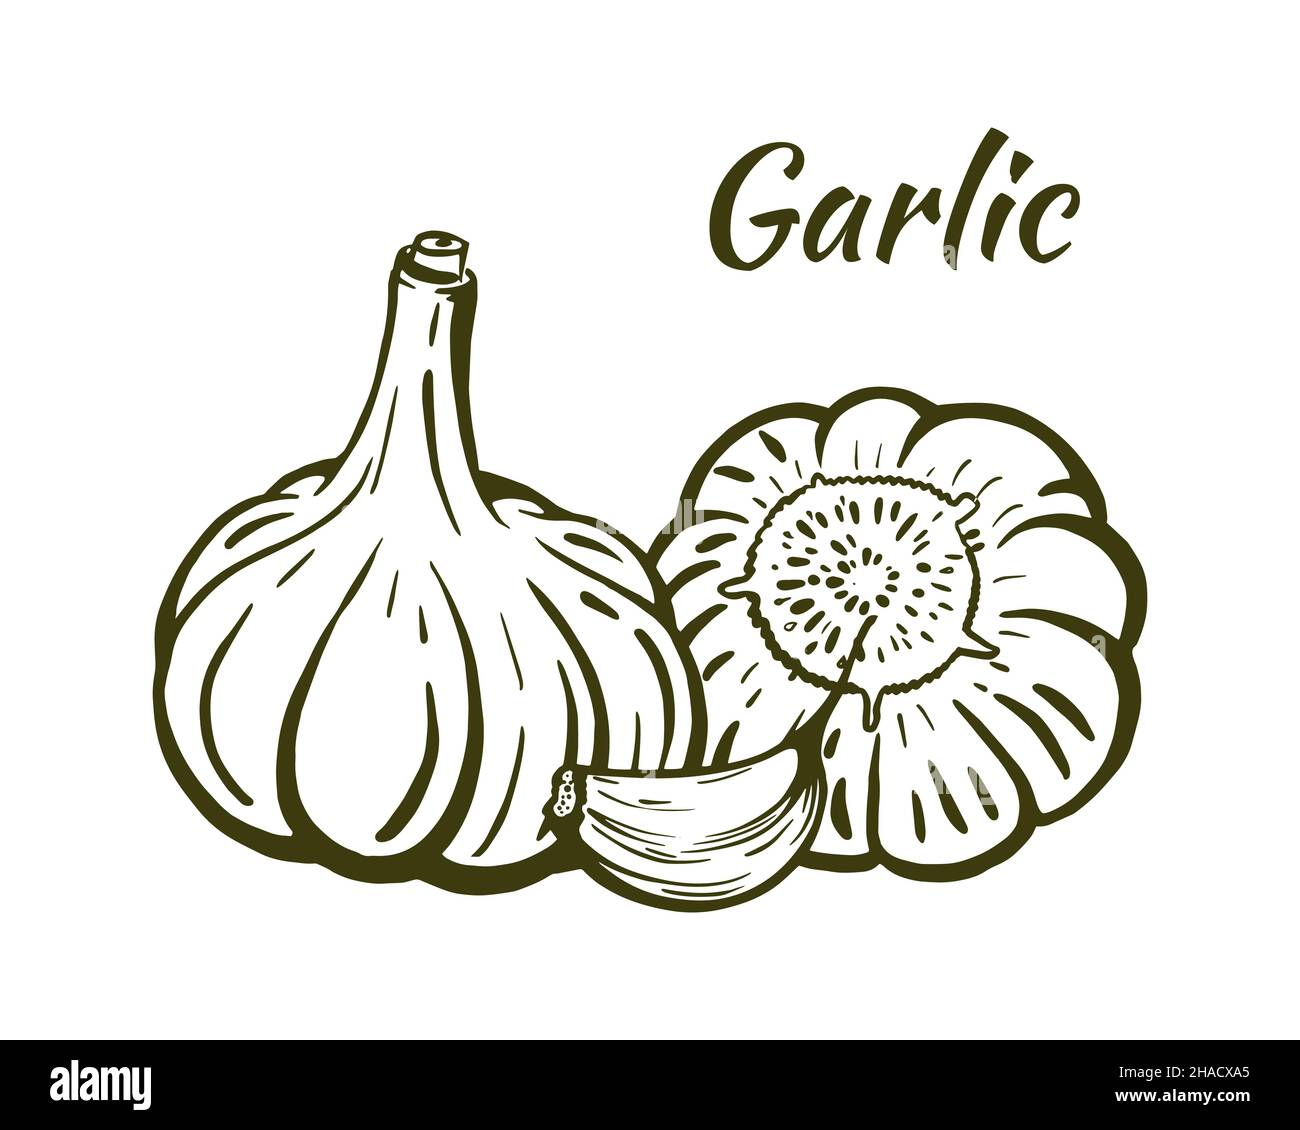 Garlic still life sketch, hand-drawn. Heads of garlic and one clove. Illustration isolated on white background. Vector. Stock Vector